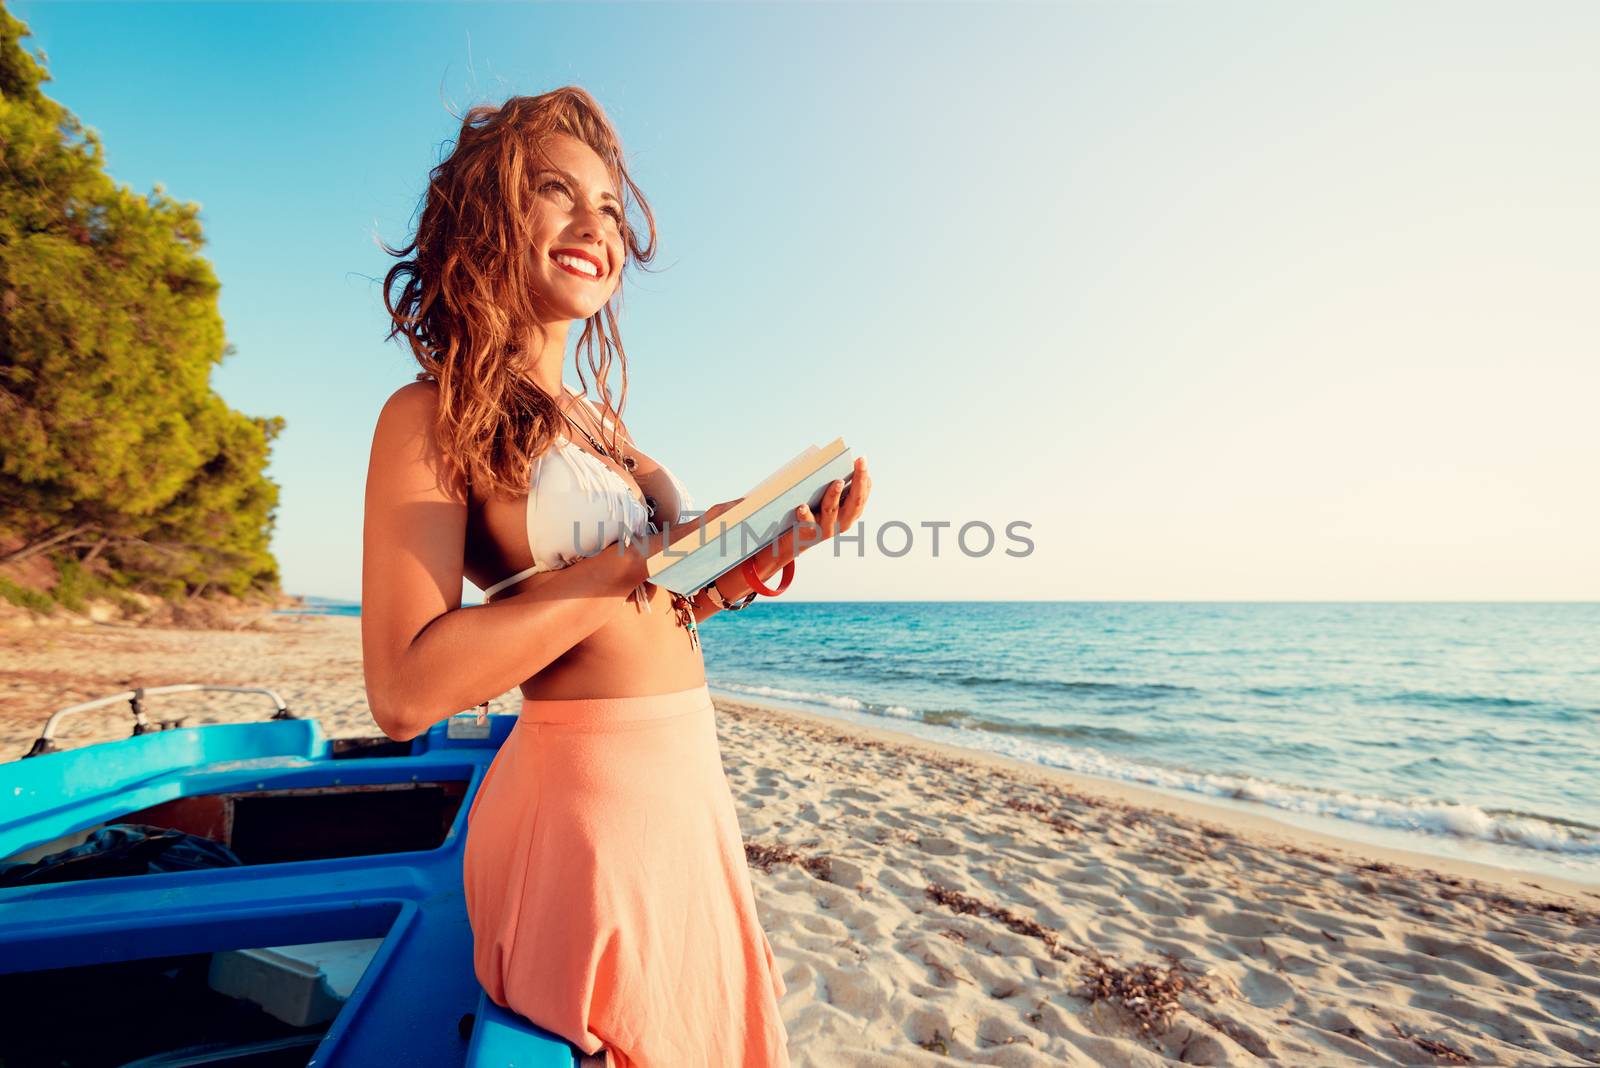 Young woman reading a book on the sandy beach.  She is standing next to boat and looking away with smile on her thinking face.